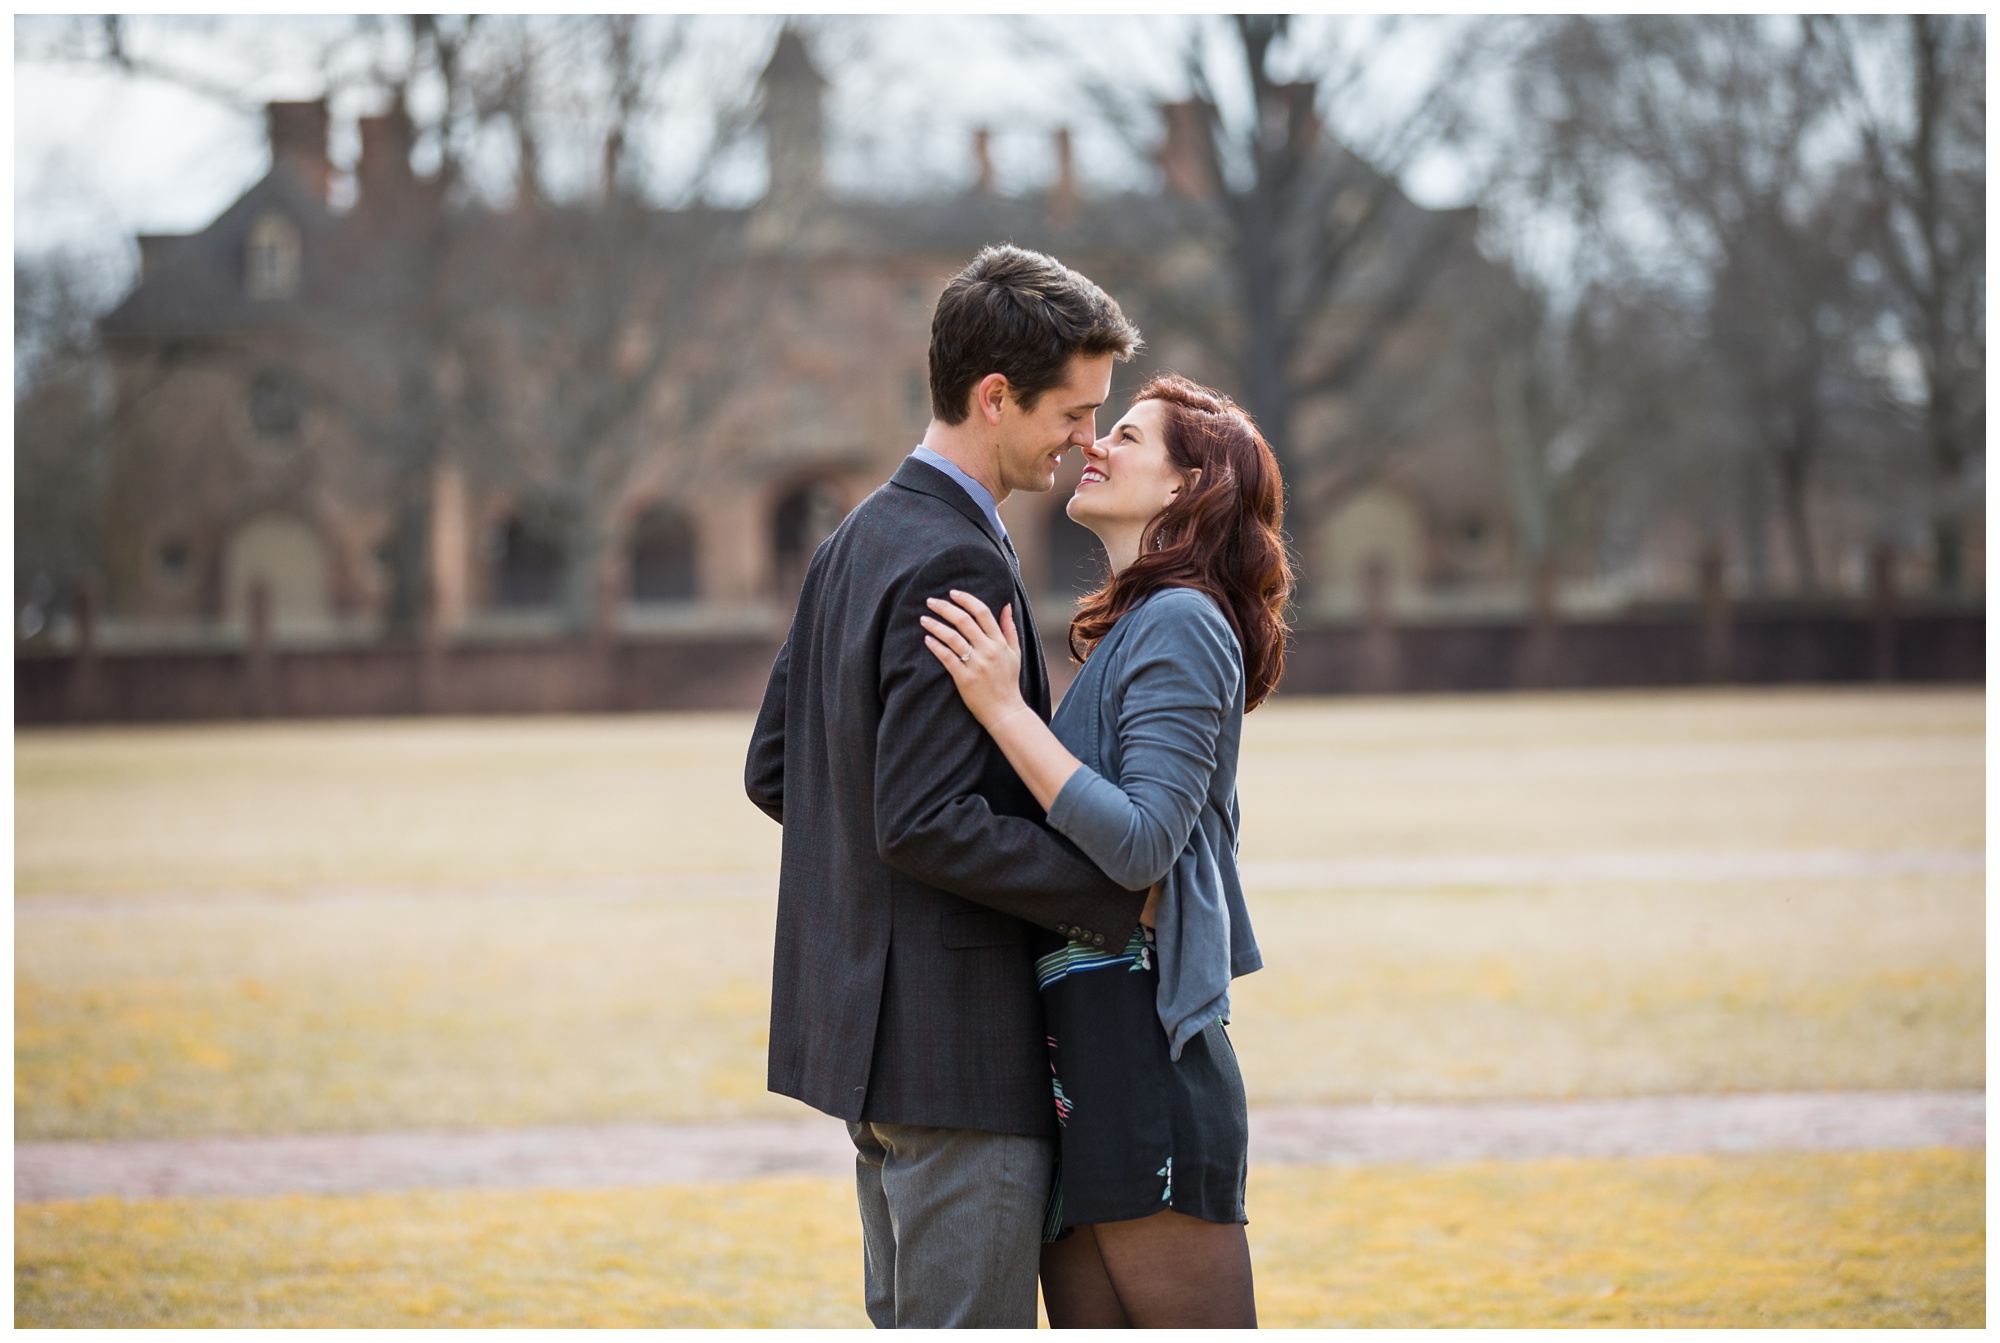 Rachel & Will | William & Mary Engagement Session